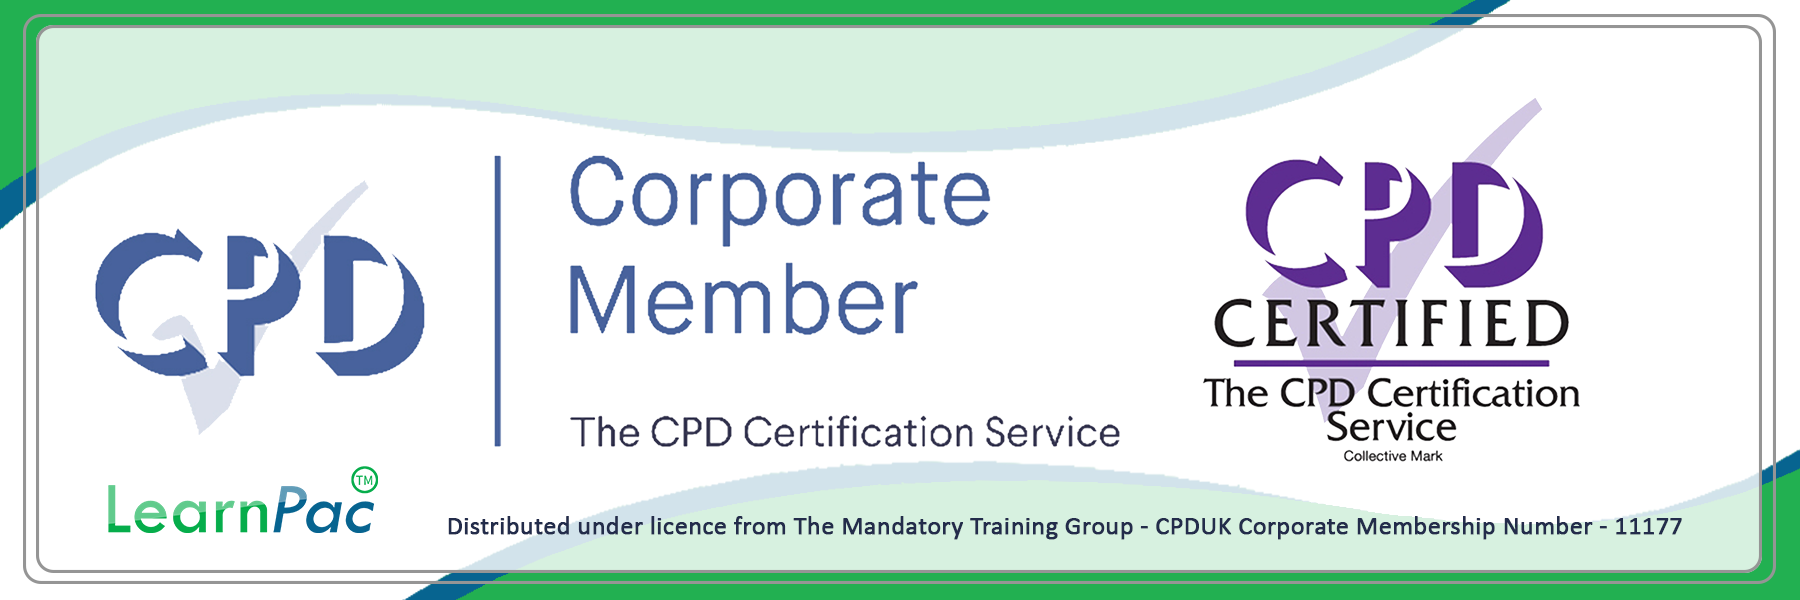 Mandatory Courses and Training - E-Learning Courses with Certificates - CPD Certified - LearnPac Systems UK -